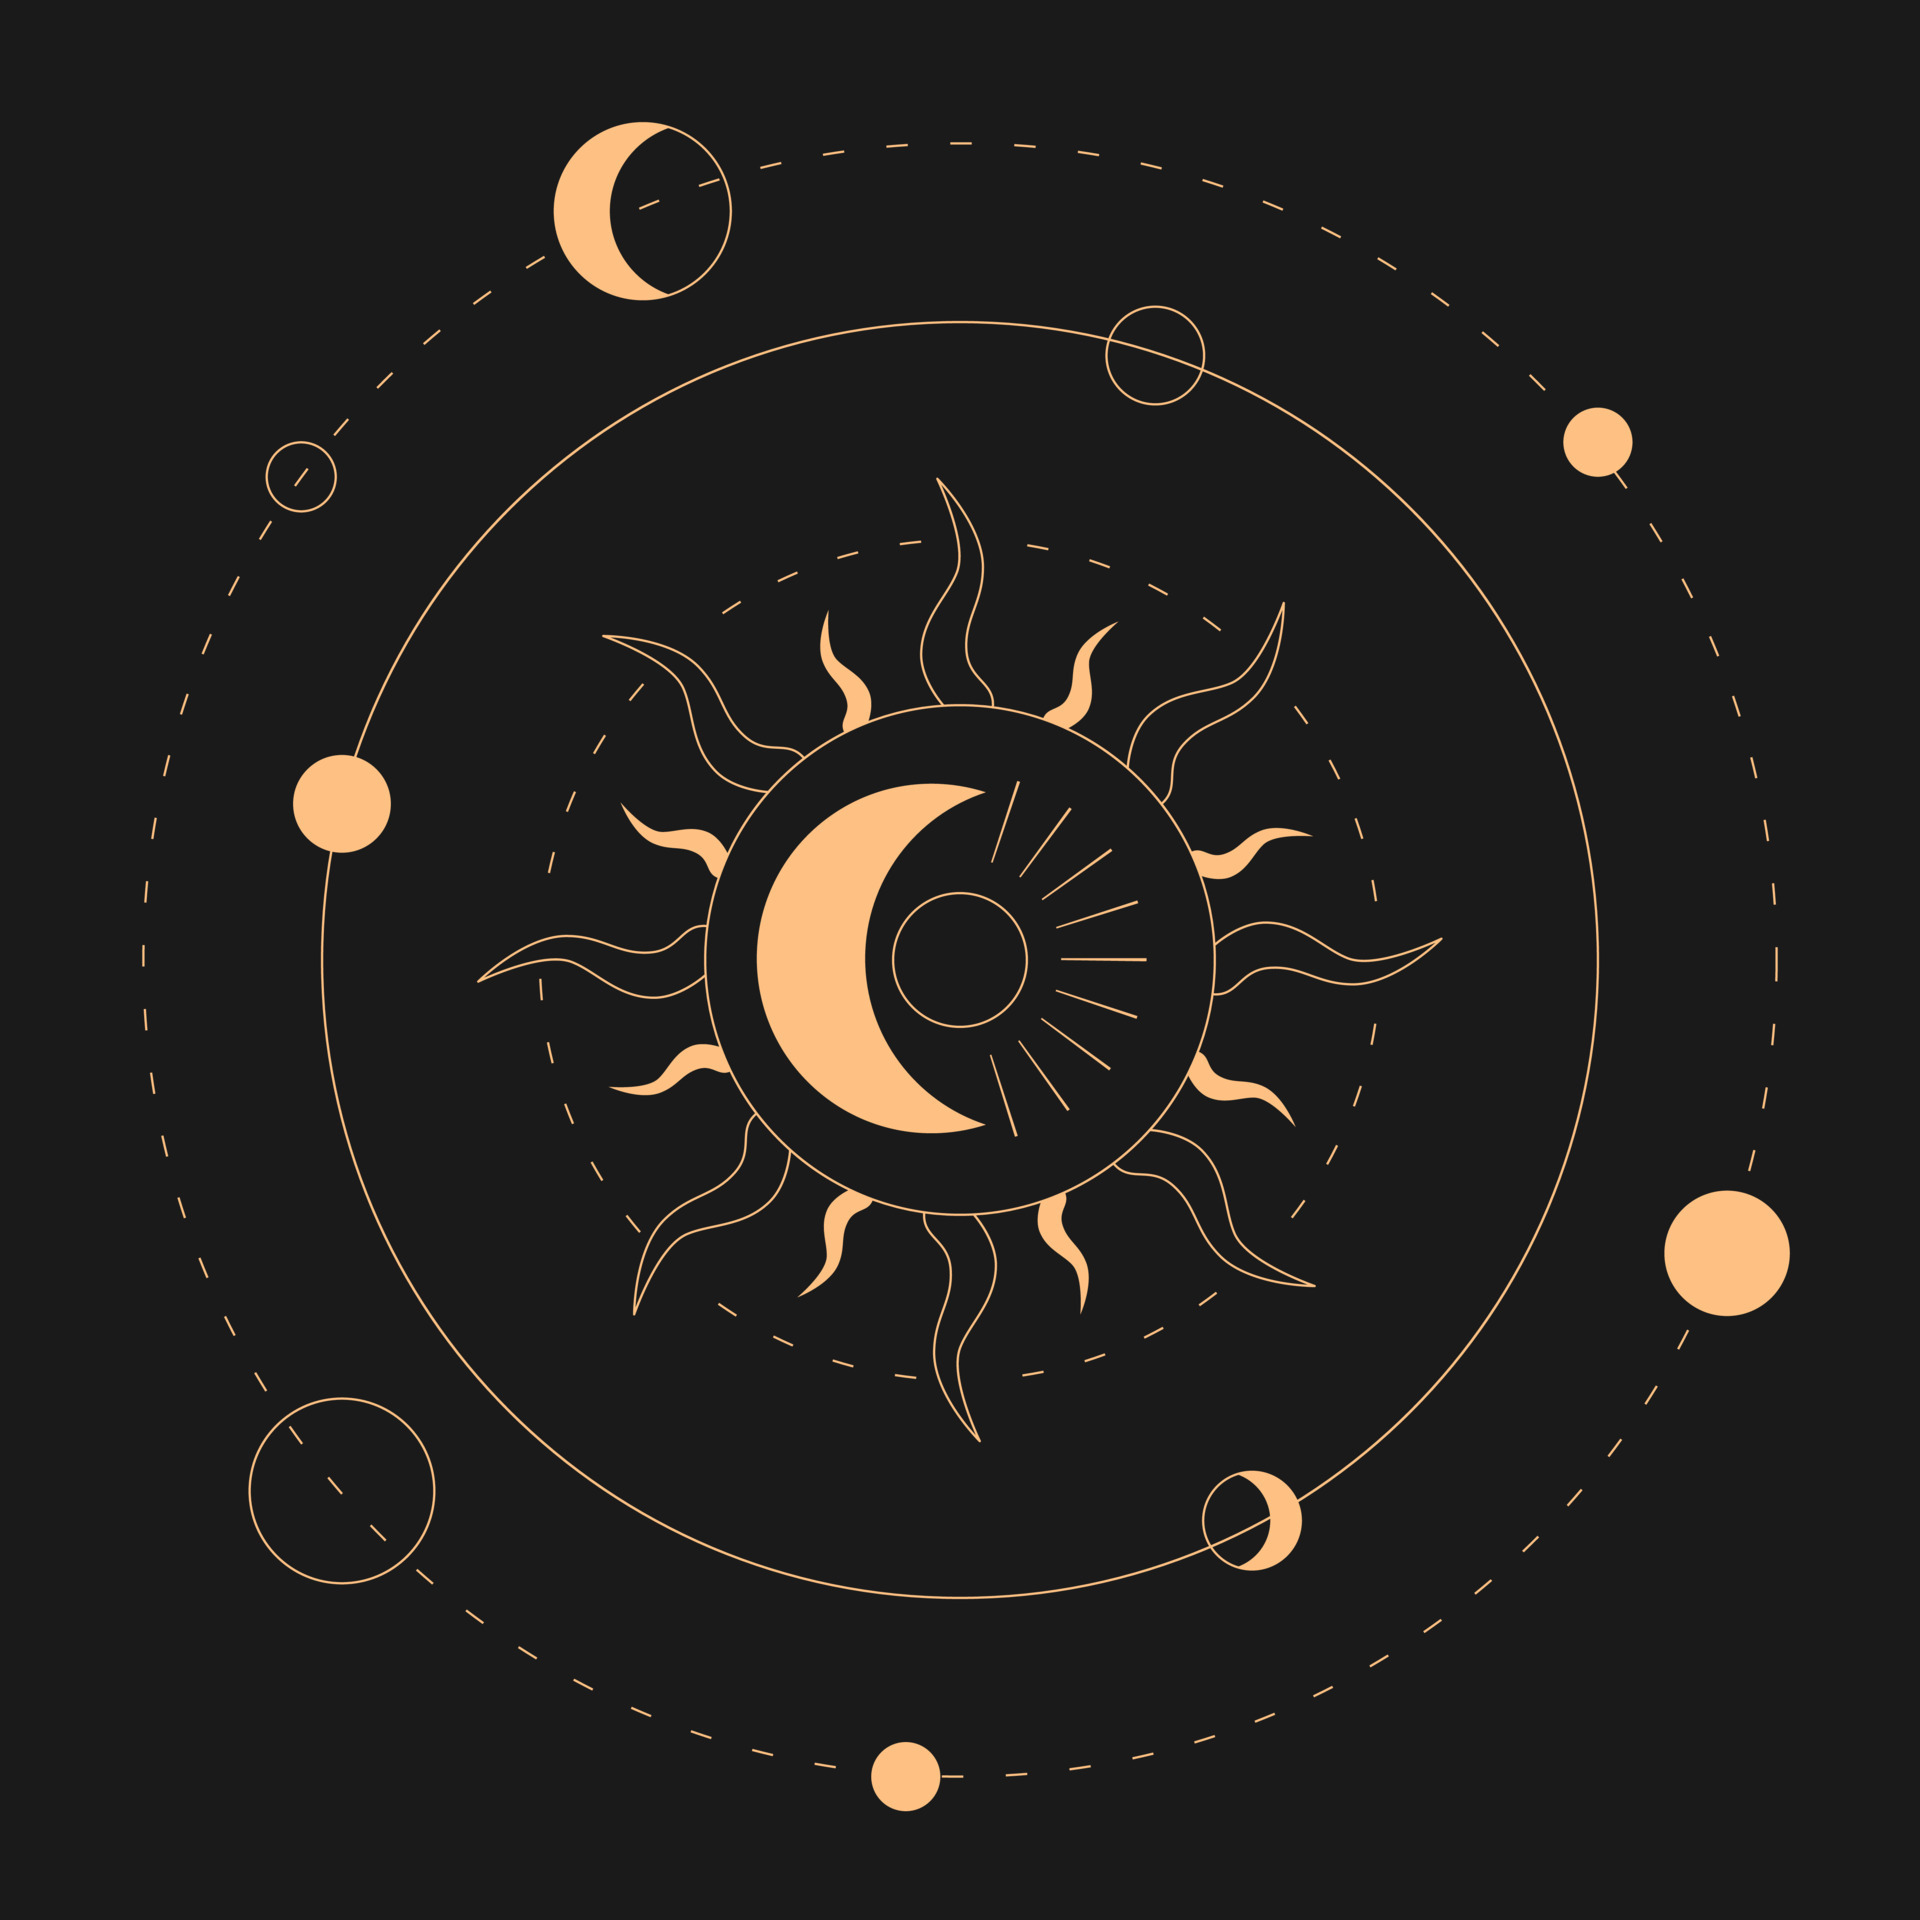 Modèles pour les absences et départs Celestial-sun-and-moon-magical-banner-for-astrology-celestial-alchemy-device-of-the-universe-crescent-sun-with-the-moon-and-planets-on-a-black-background-esoteric-illustration-vector